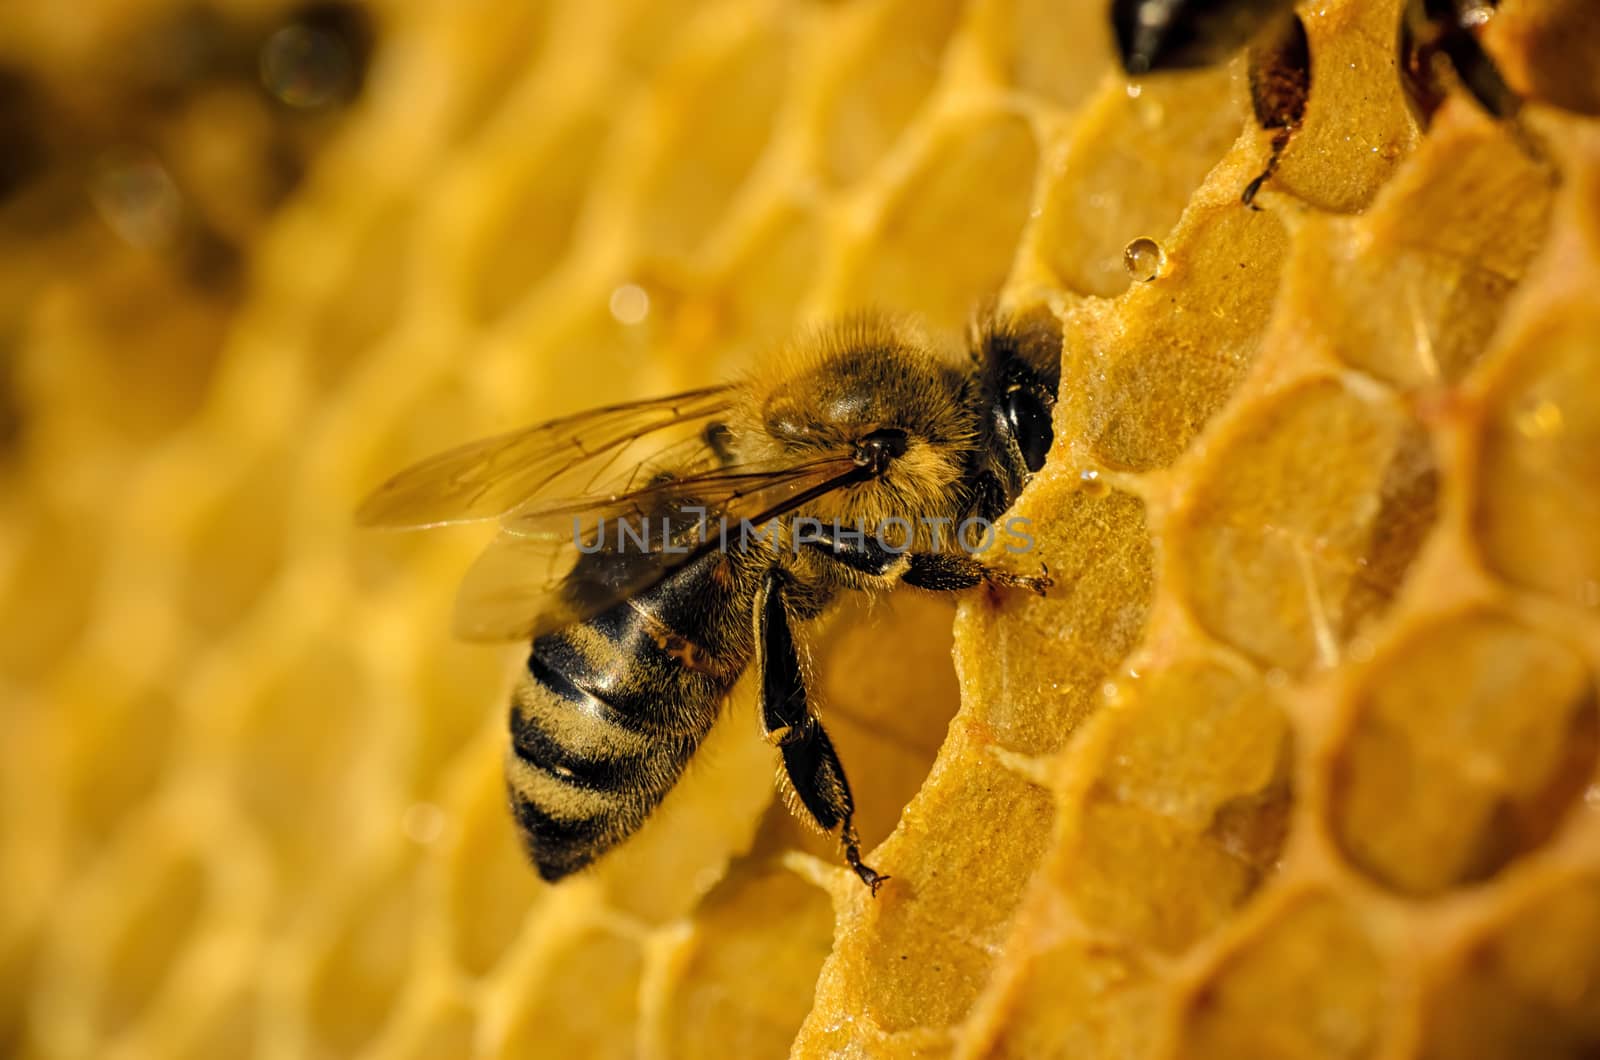 Bees work on honeycomb by Attila